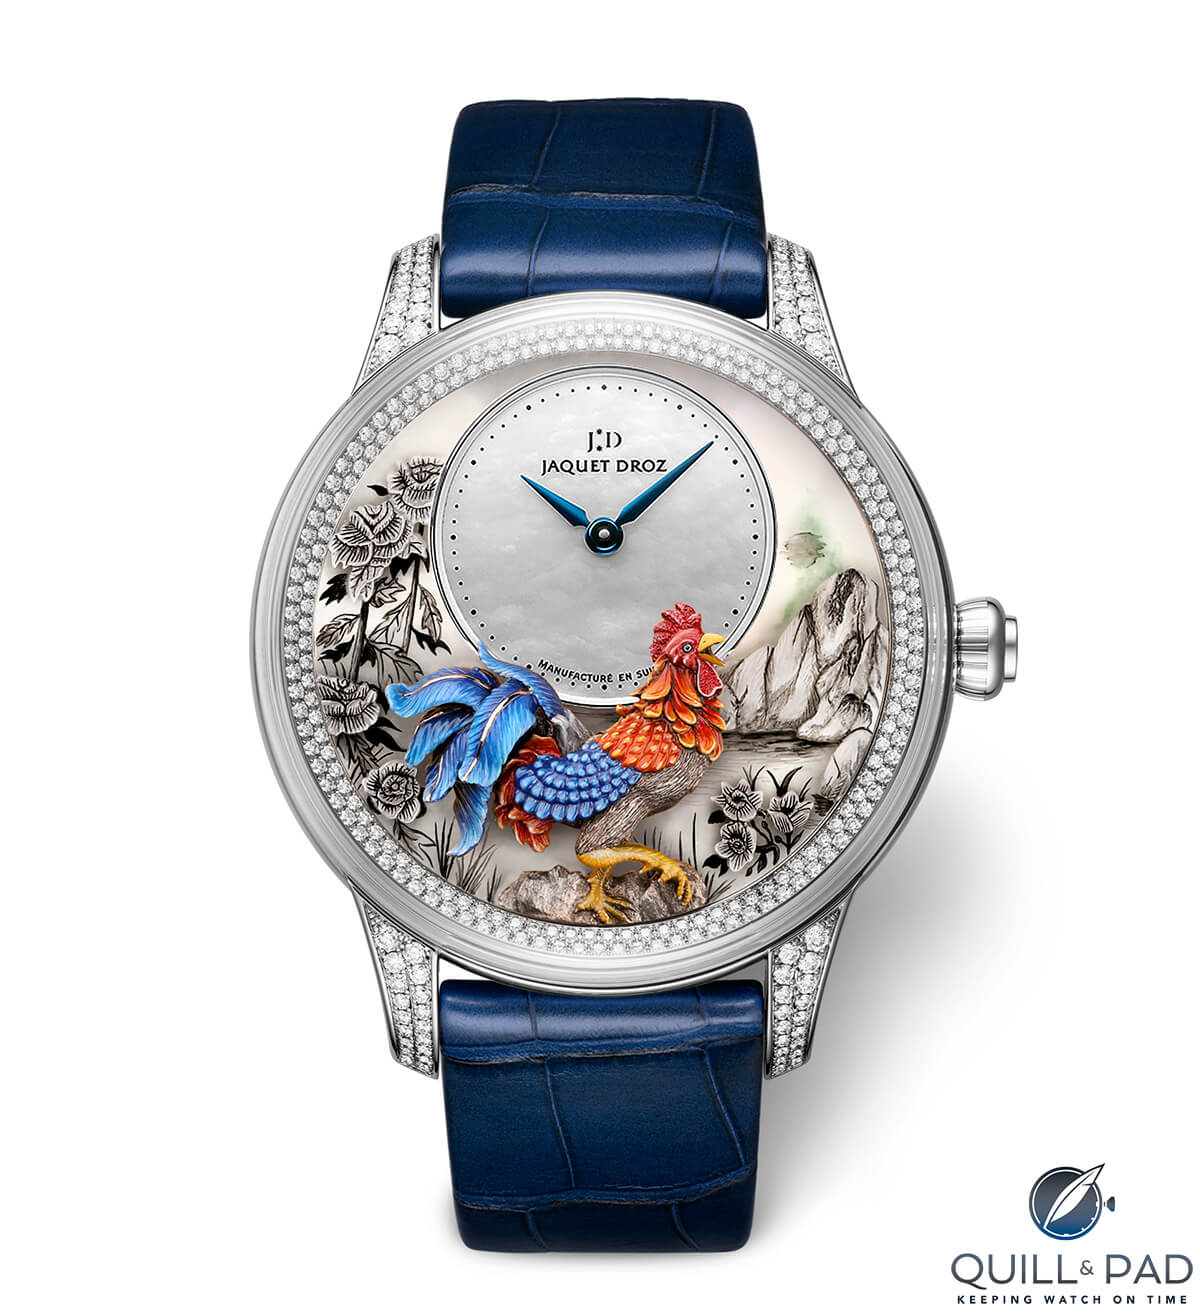 Jaquet Droz Petite Heure Minute Relief Rooster with diamond-set bezel